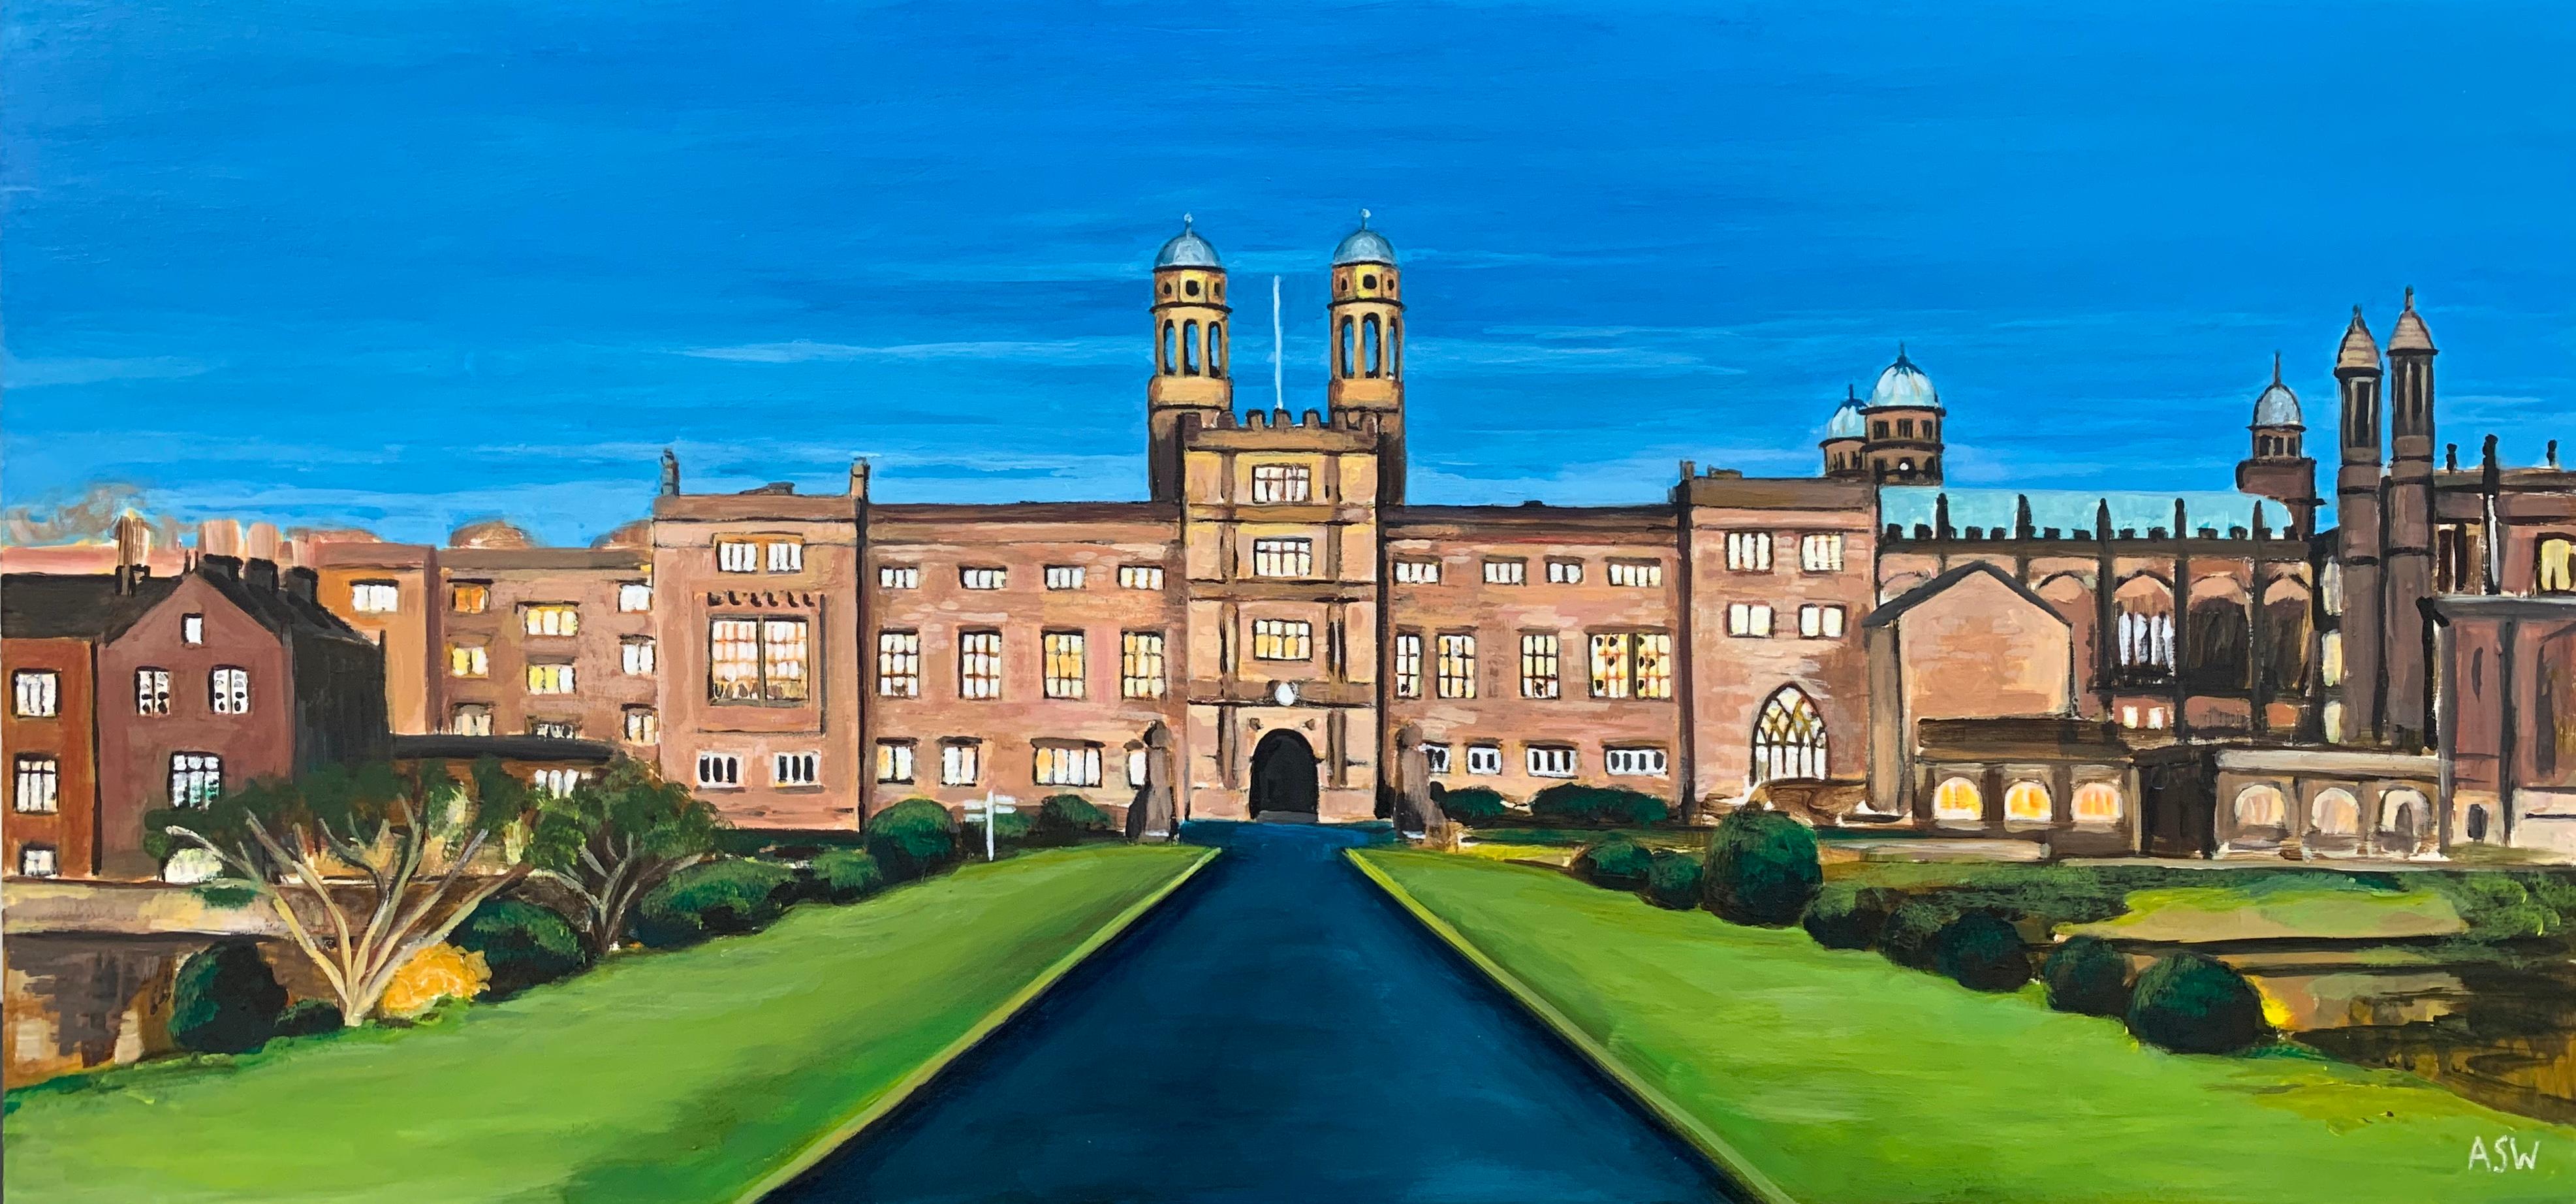 Stonyhurst College 16th Century Grade 1 Listed Building in English Countryside - Realist Painting by Angela Wakefield